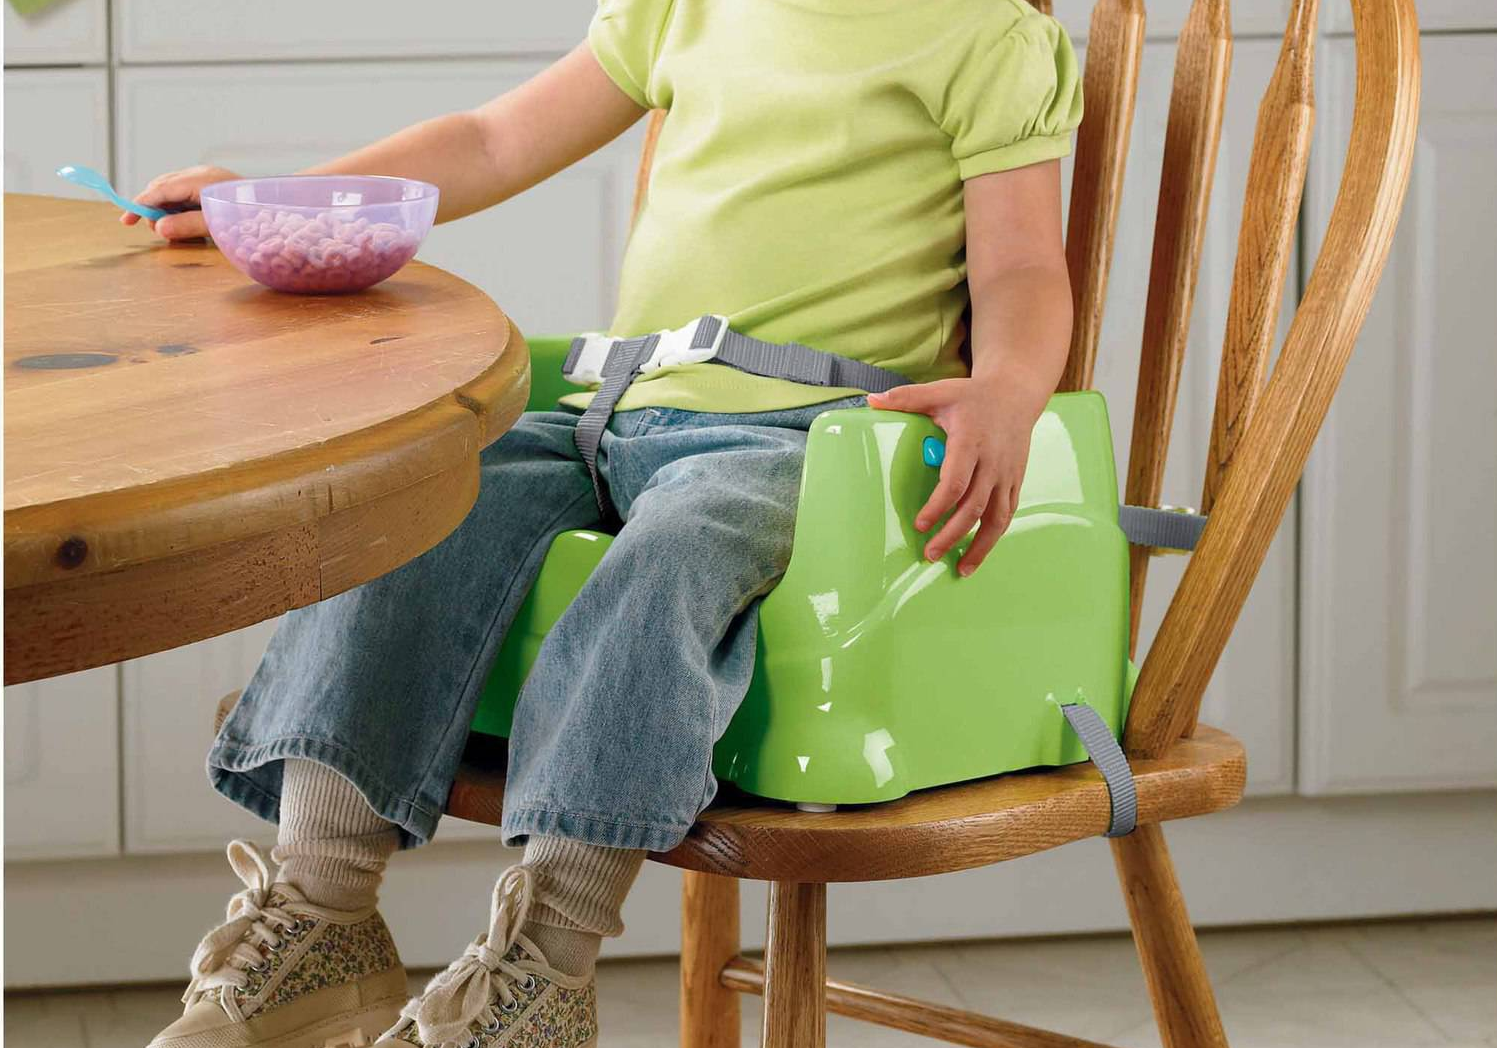 Fisher-Price Healthy Care Booster Seat Down to $16.00!